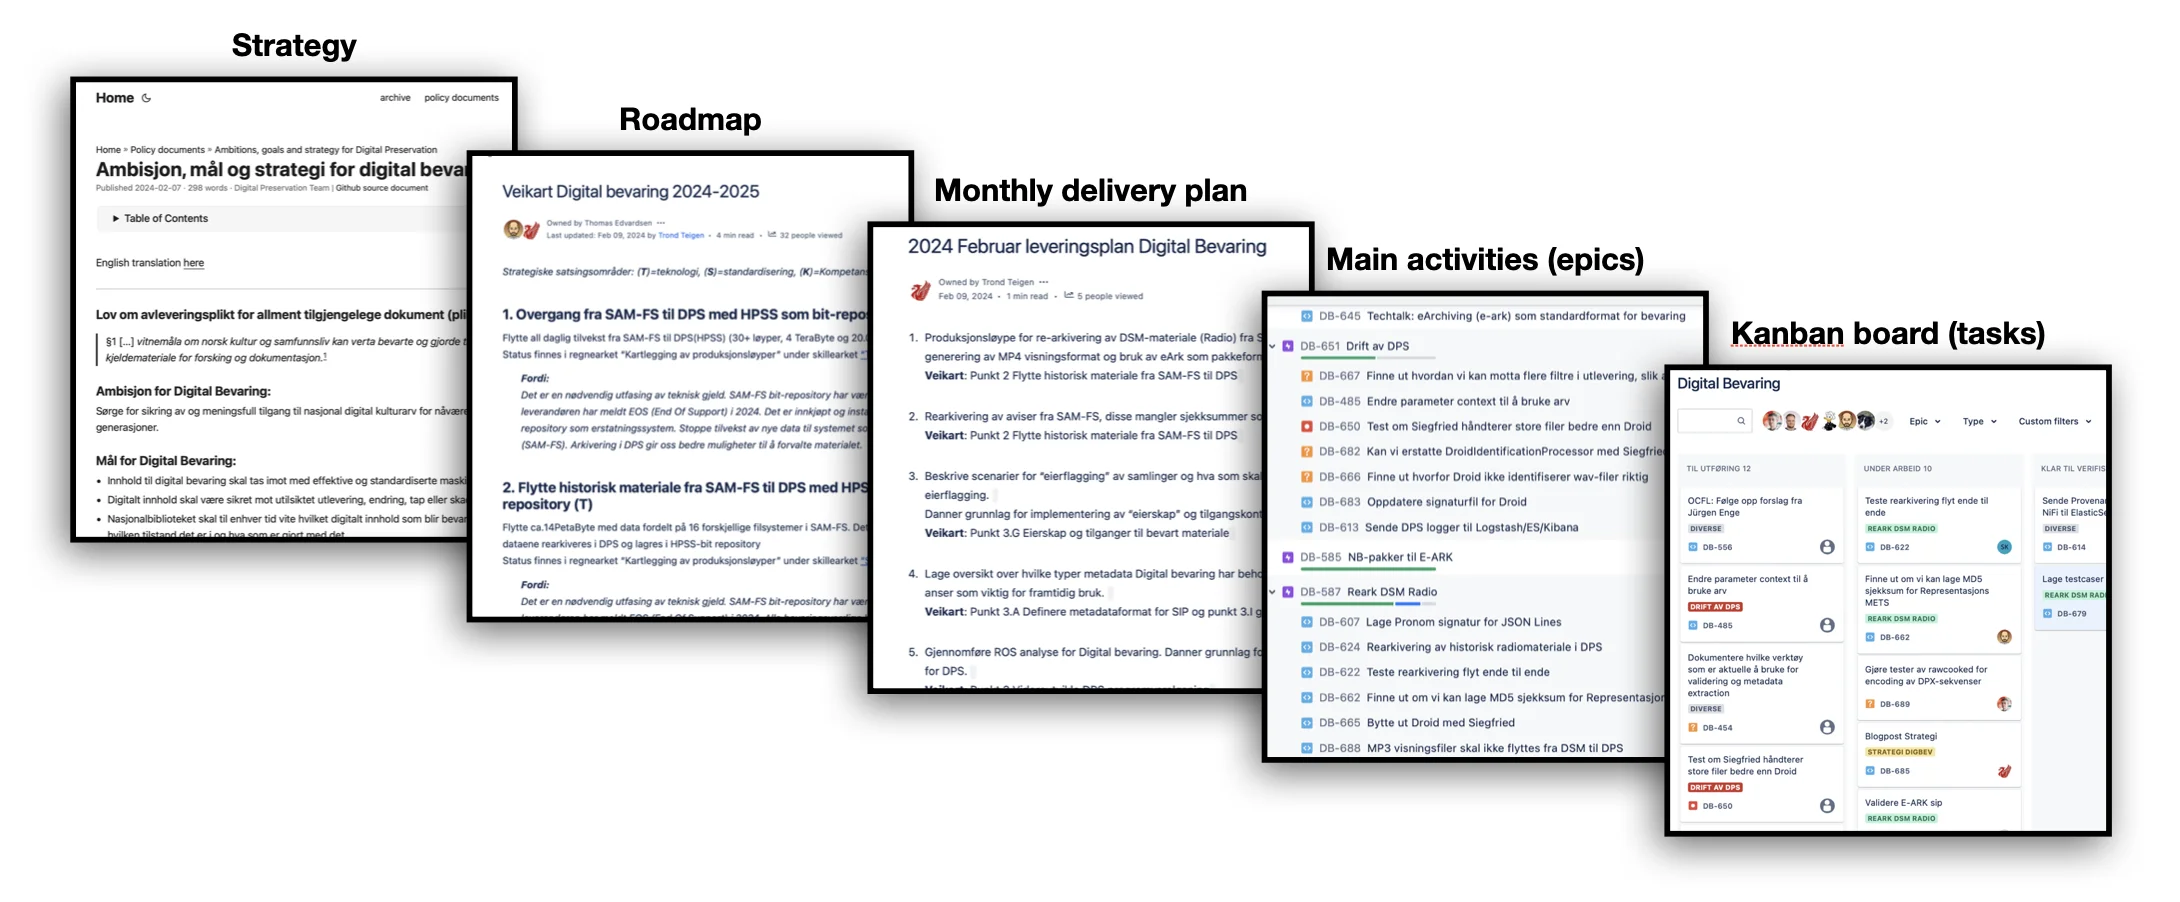 Figure showing excerpts from our strategy document, 2 year roadmap, monthly delivery plan, epics, and tasks on a kanban board.